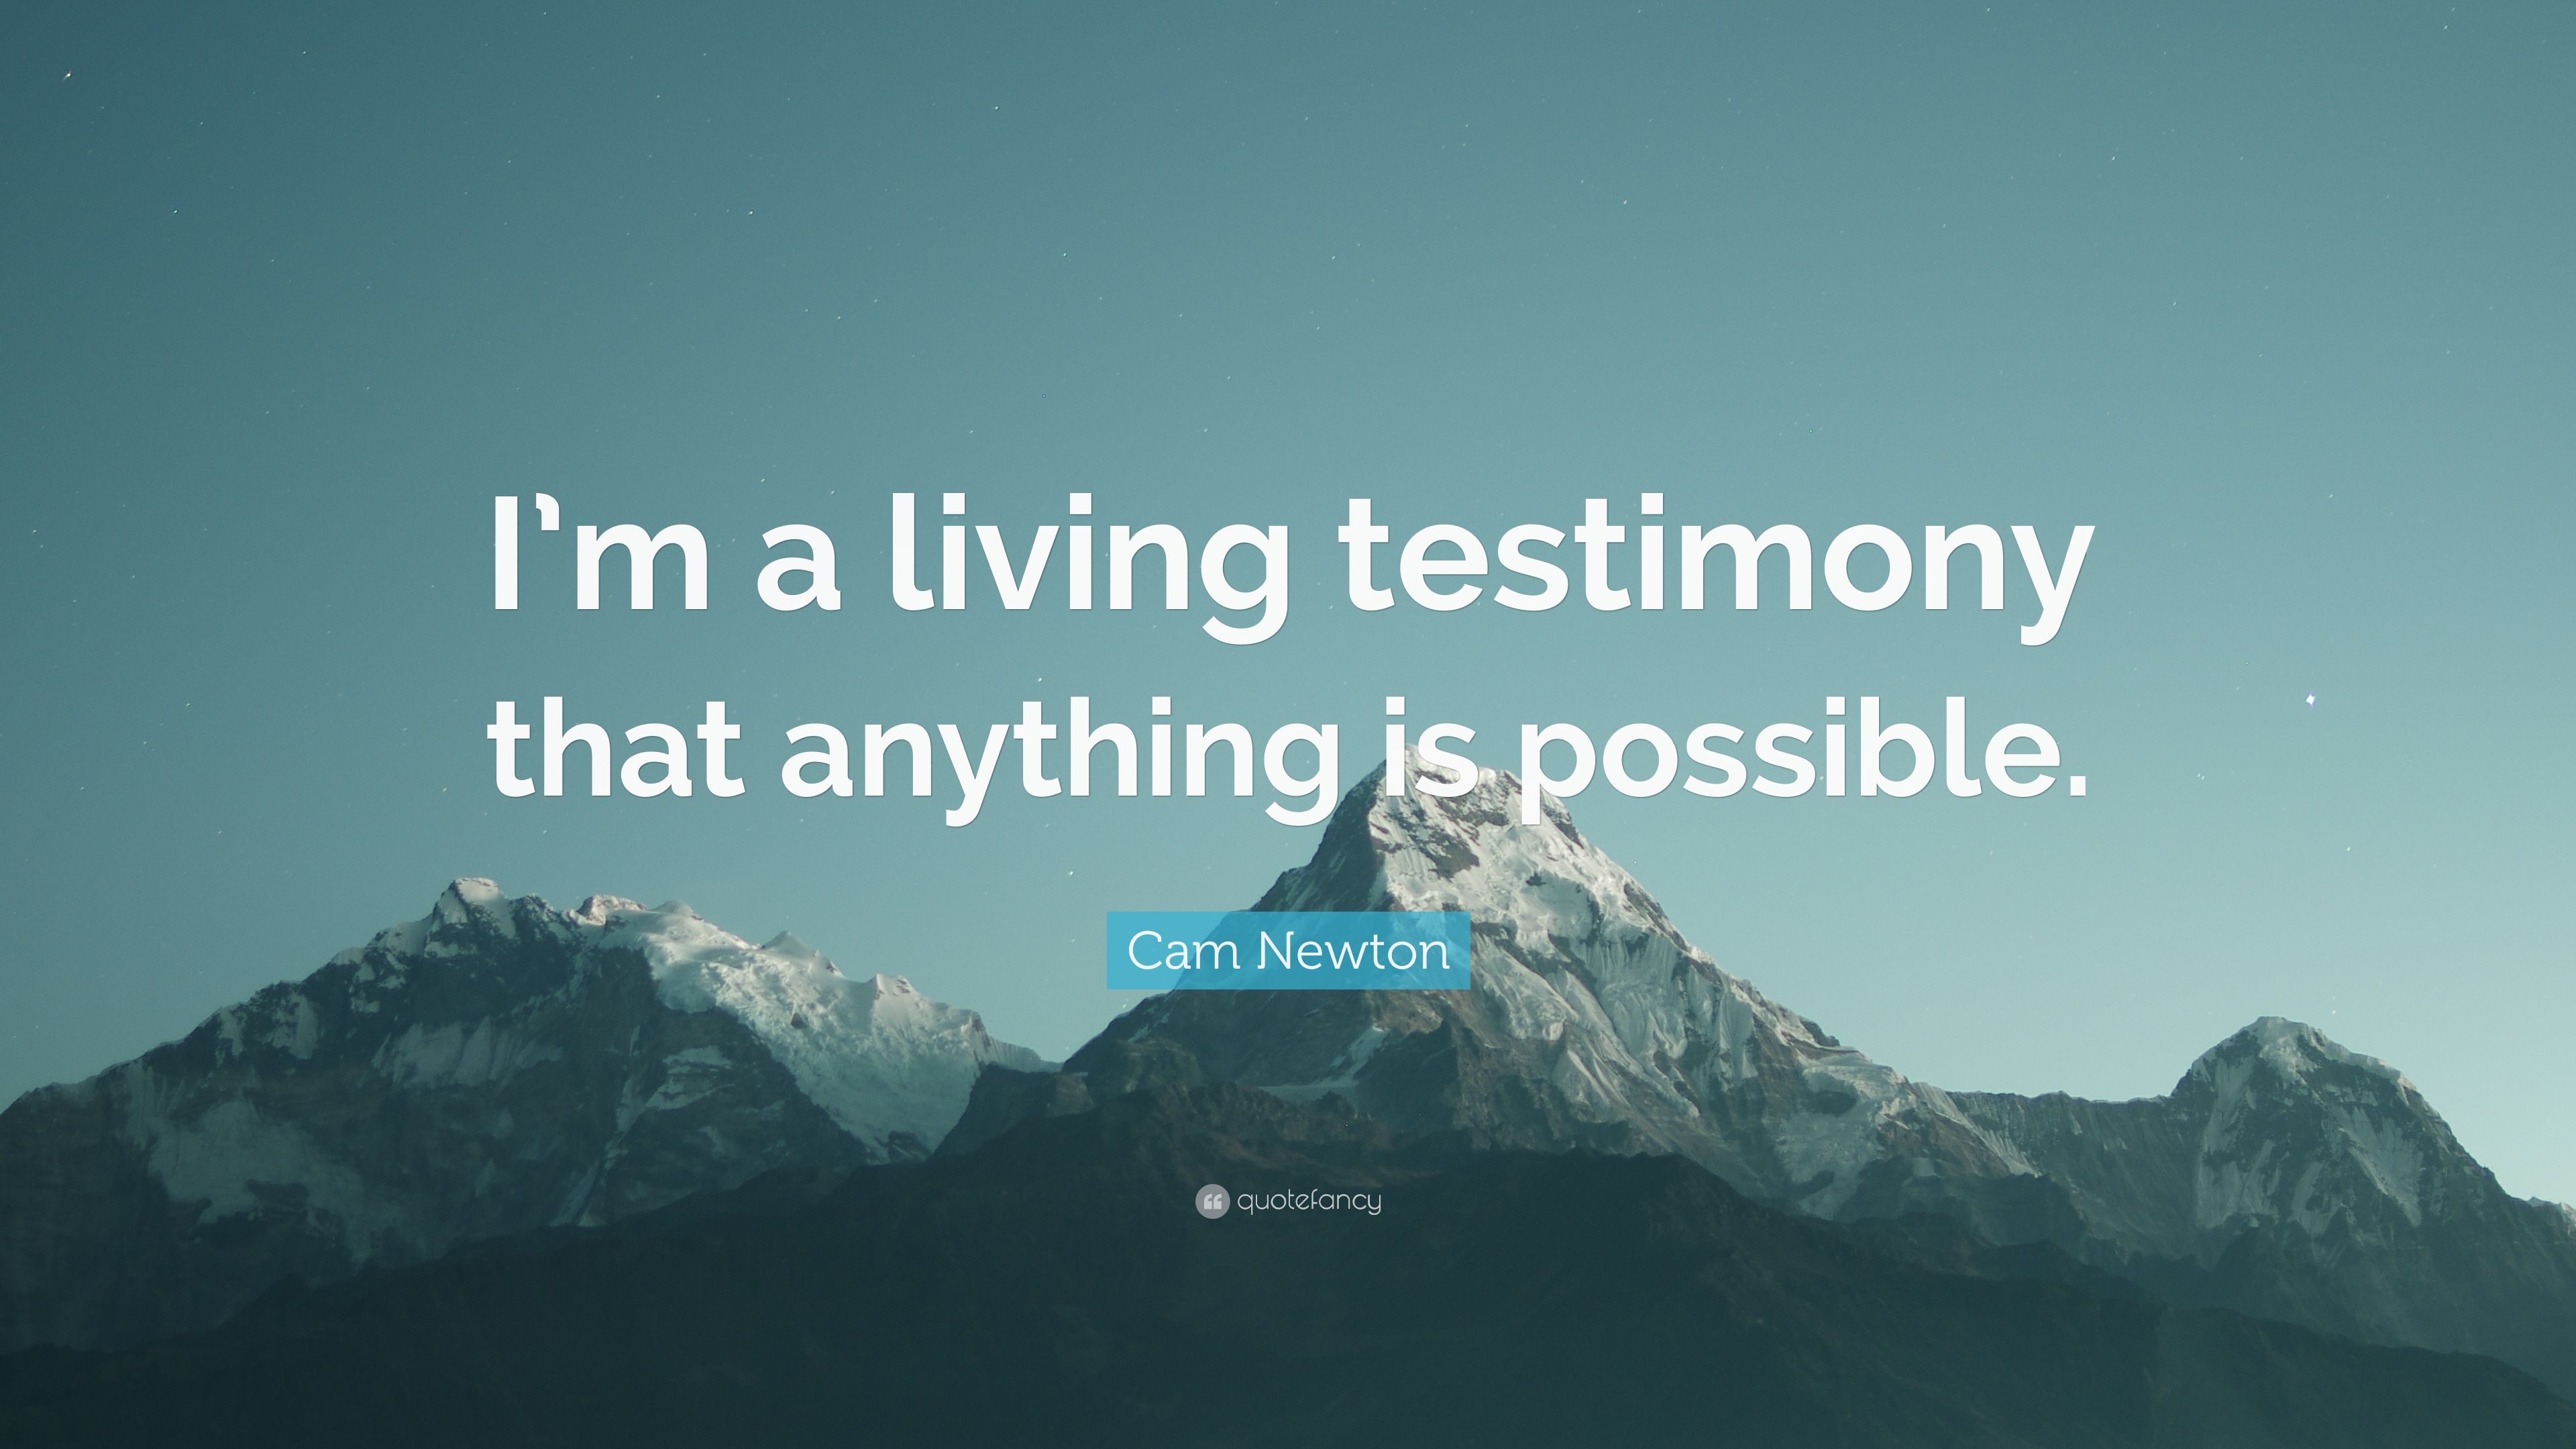 Cam Newton Quote: “I'm a living testimony that anything is possible.” (7 wallpaper)